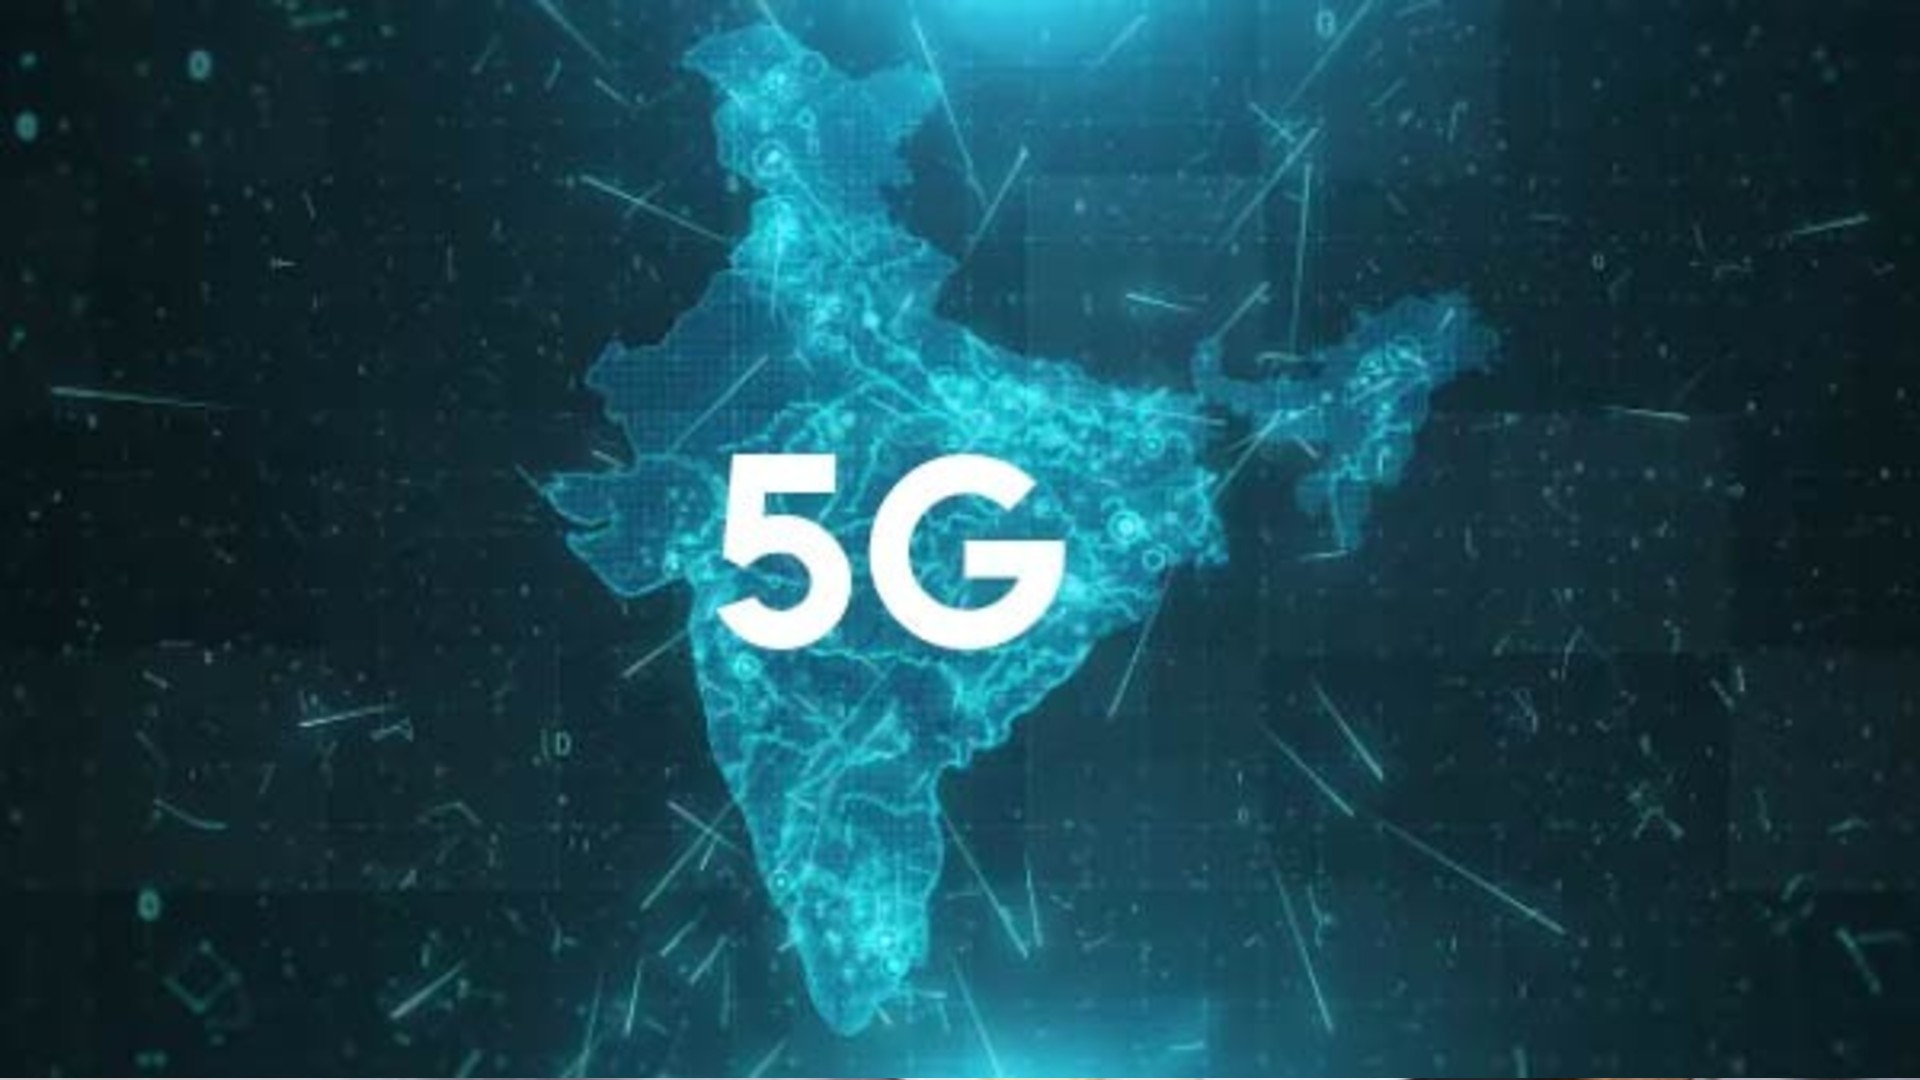 5G Testing Is Causing Covid19 In India? This Is What Airtel, Jio, Vodafone Has To Say